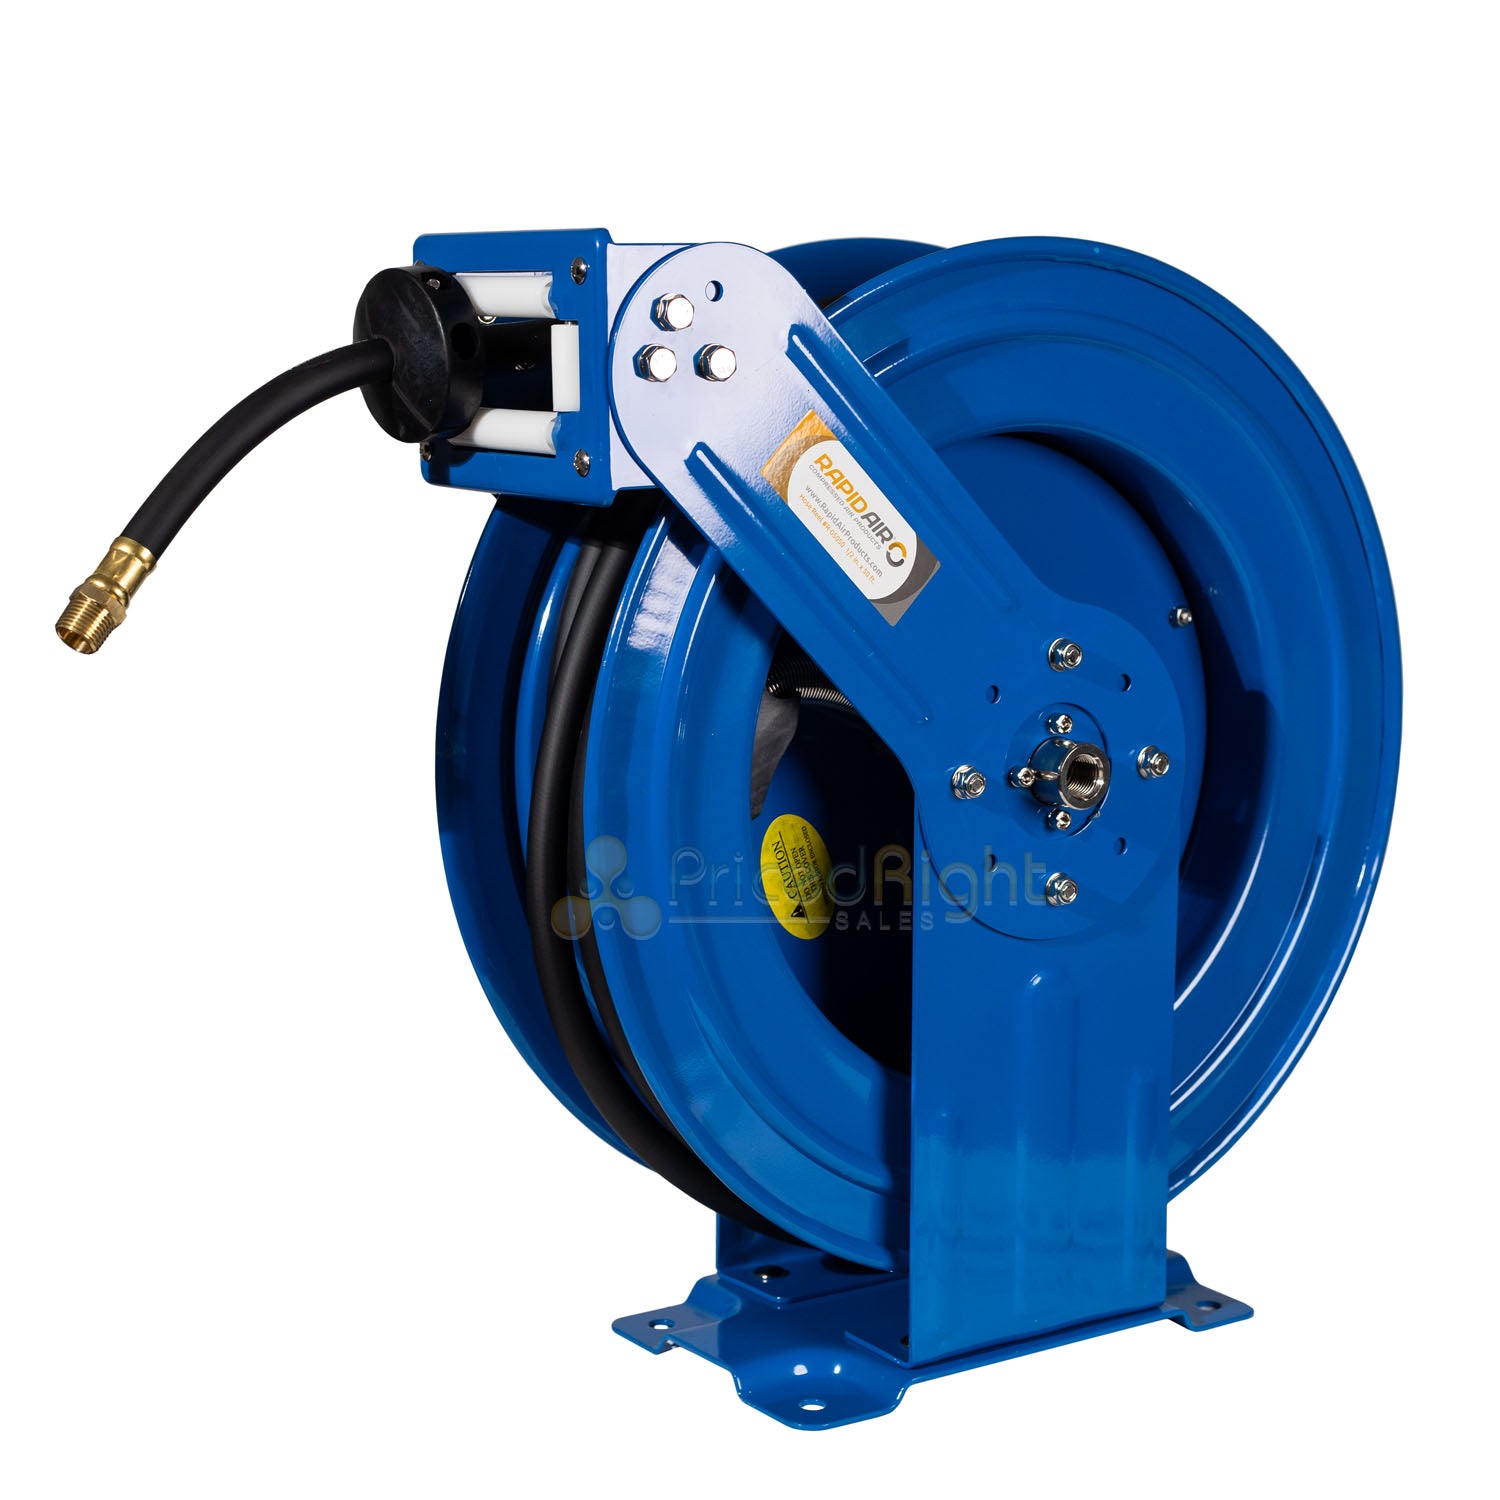 Rapidair 1/2 x 50' Dual Arm Steel Hose Reel 1/2 Inlet and Outlet R-0 –  Pricedrightsales